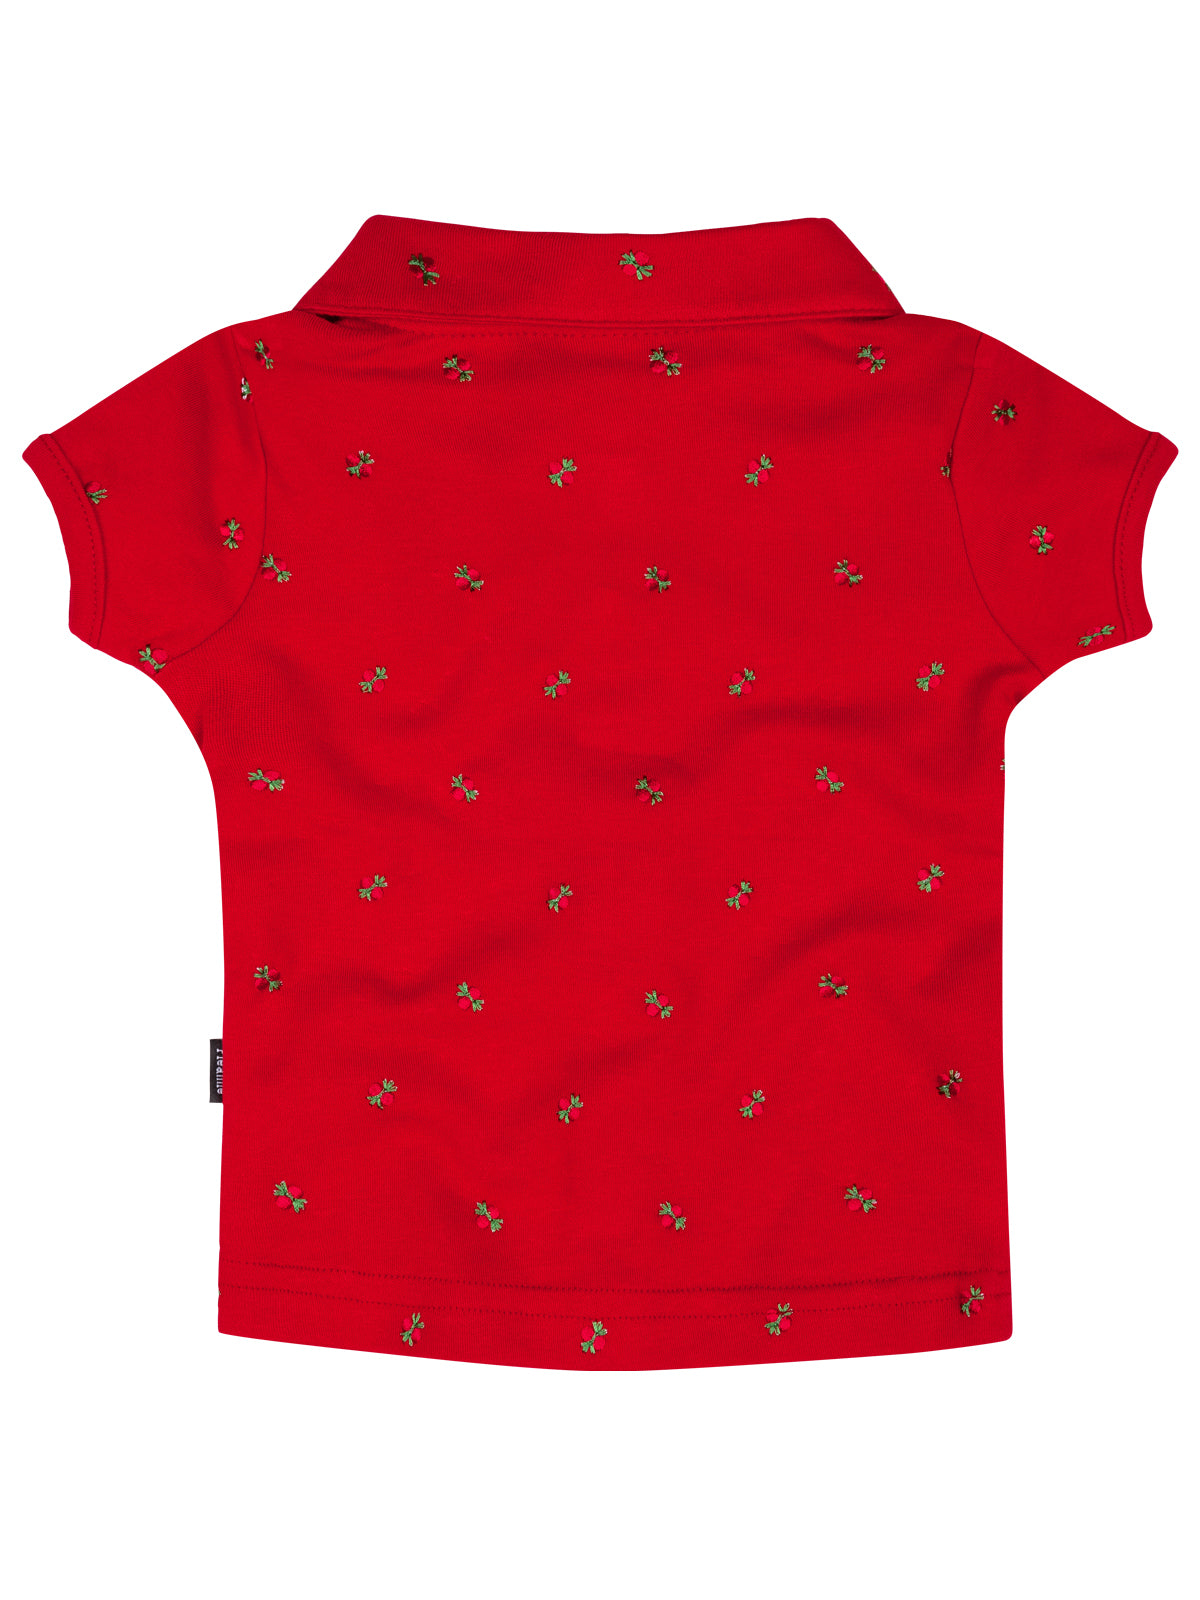 Pleamle Baby Polo Rot